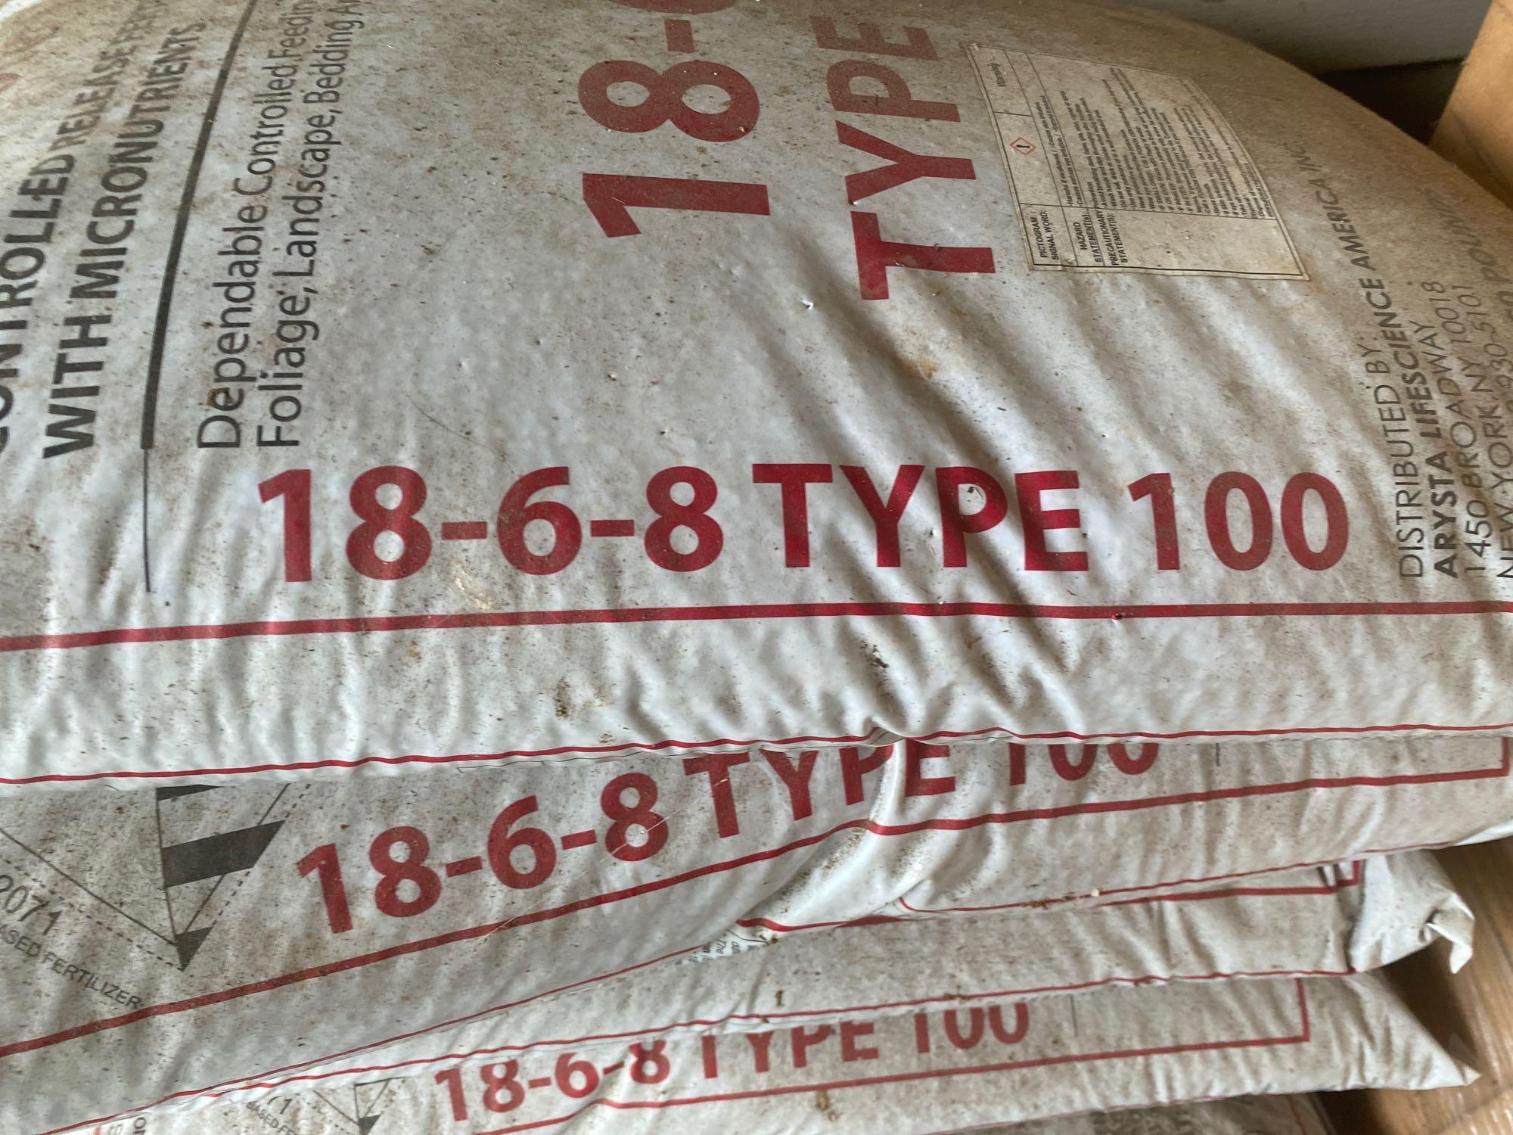 Image for Nutricote Total Fertilizer 18-6-8, 8 Type 100